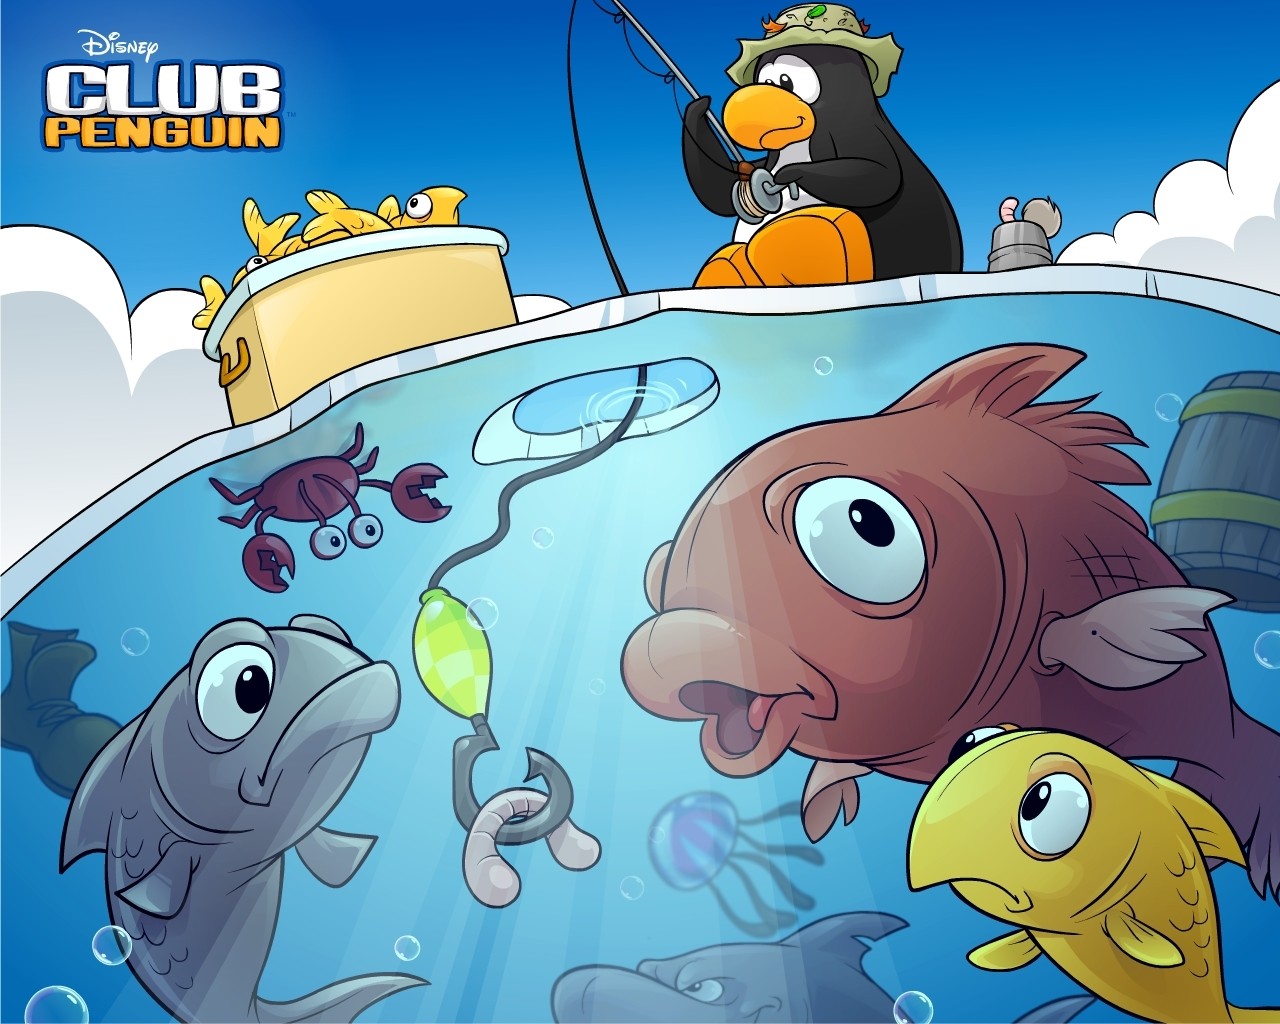 There S A New Wallpaper From Club Penguin For Your Desktop It The